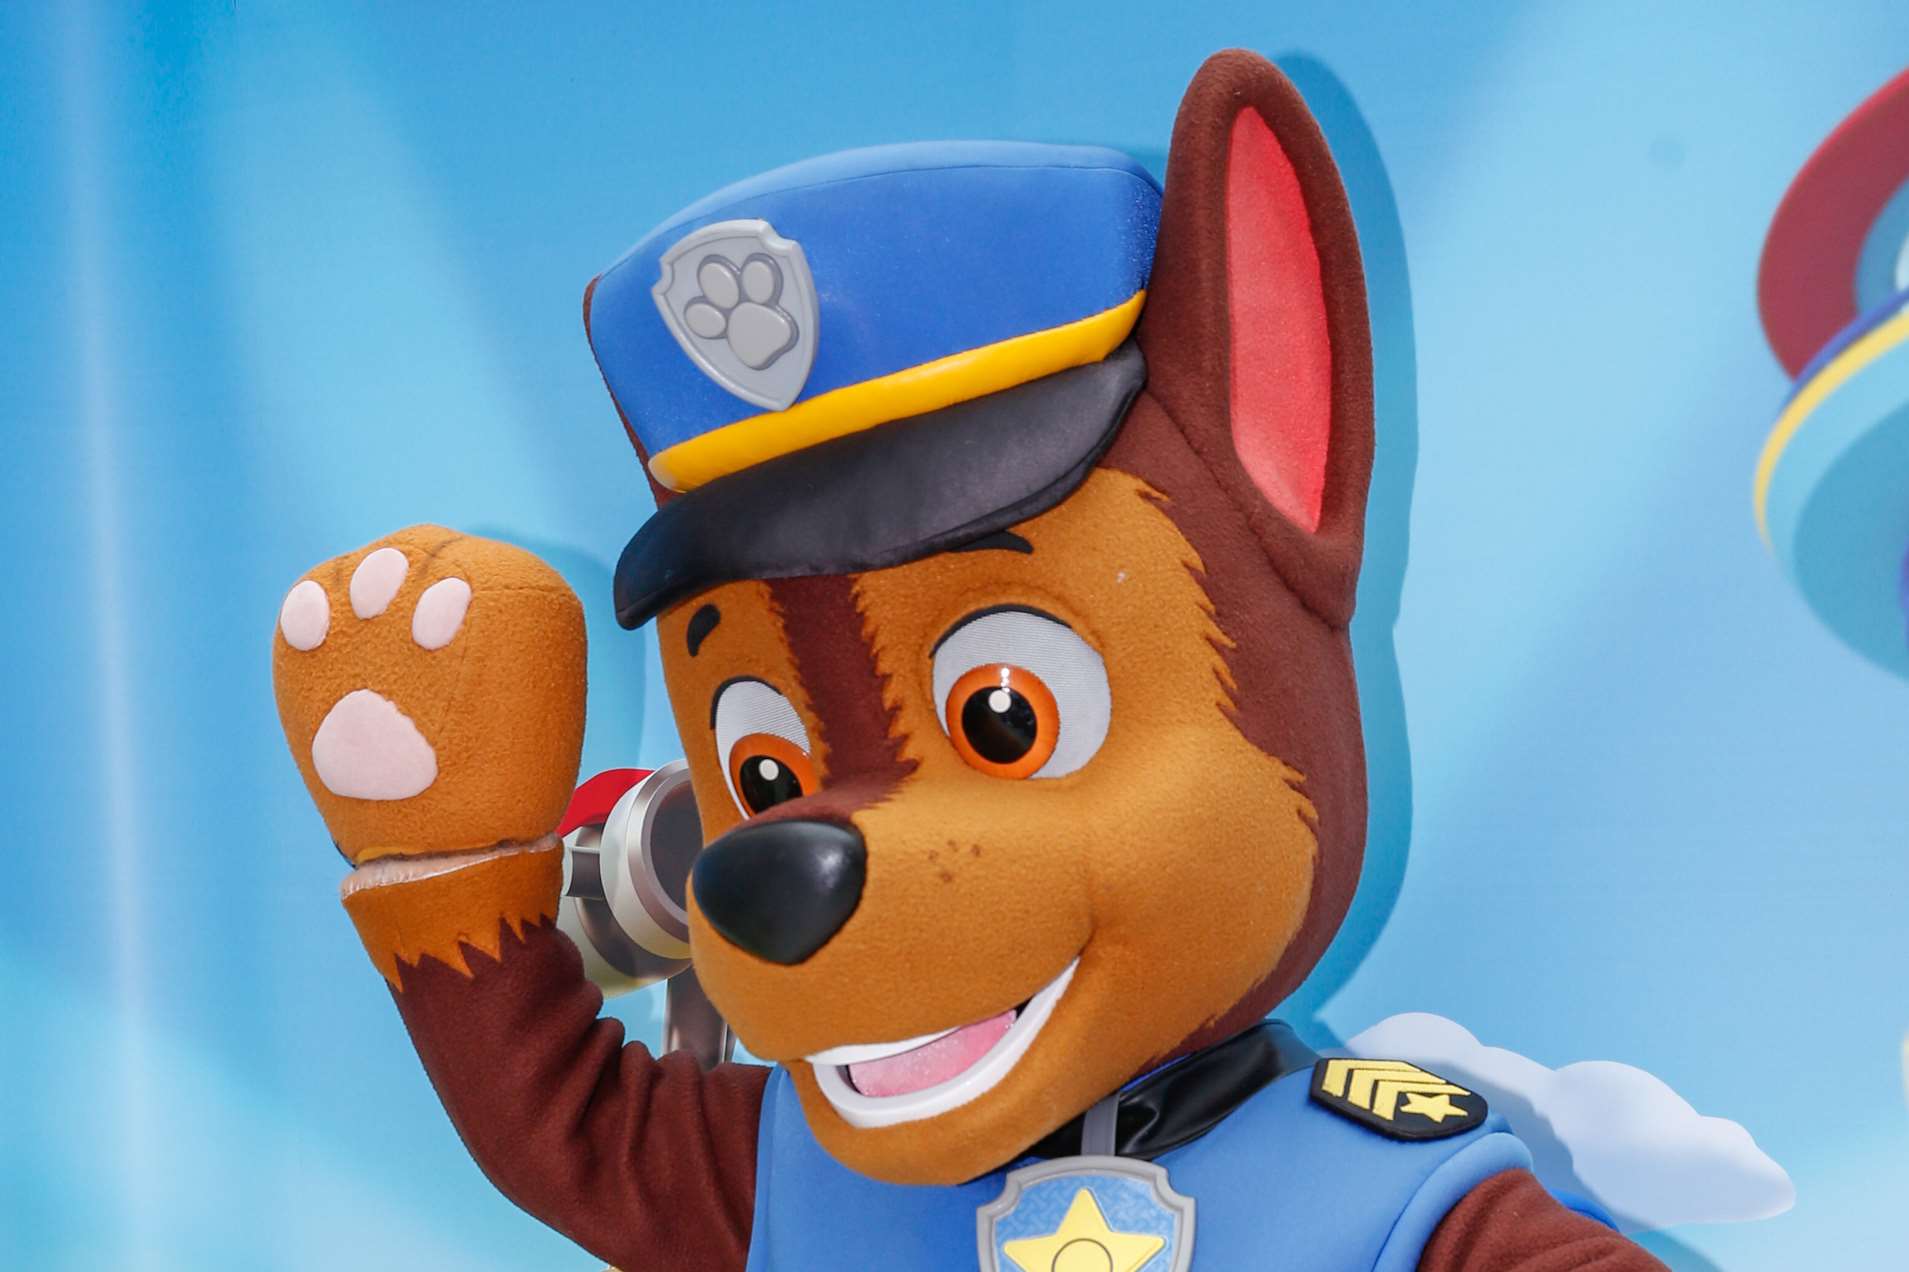 Paw Patrol character Chase